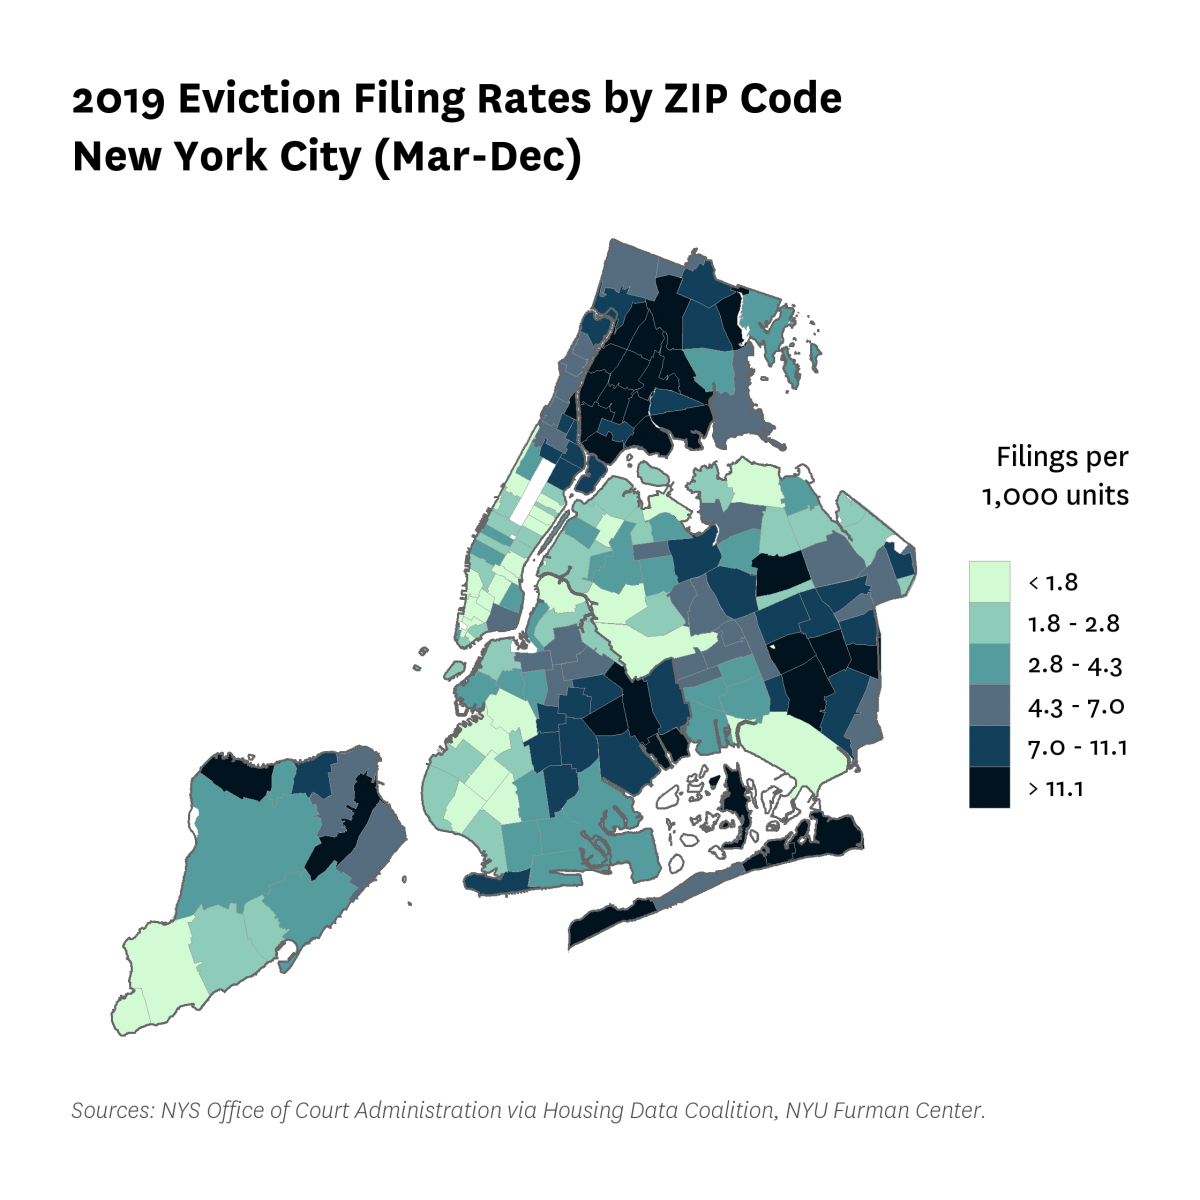 Map showing the 2019 eviction filing rates by zip code in New York City, March to December.